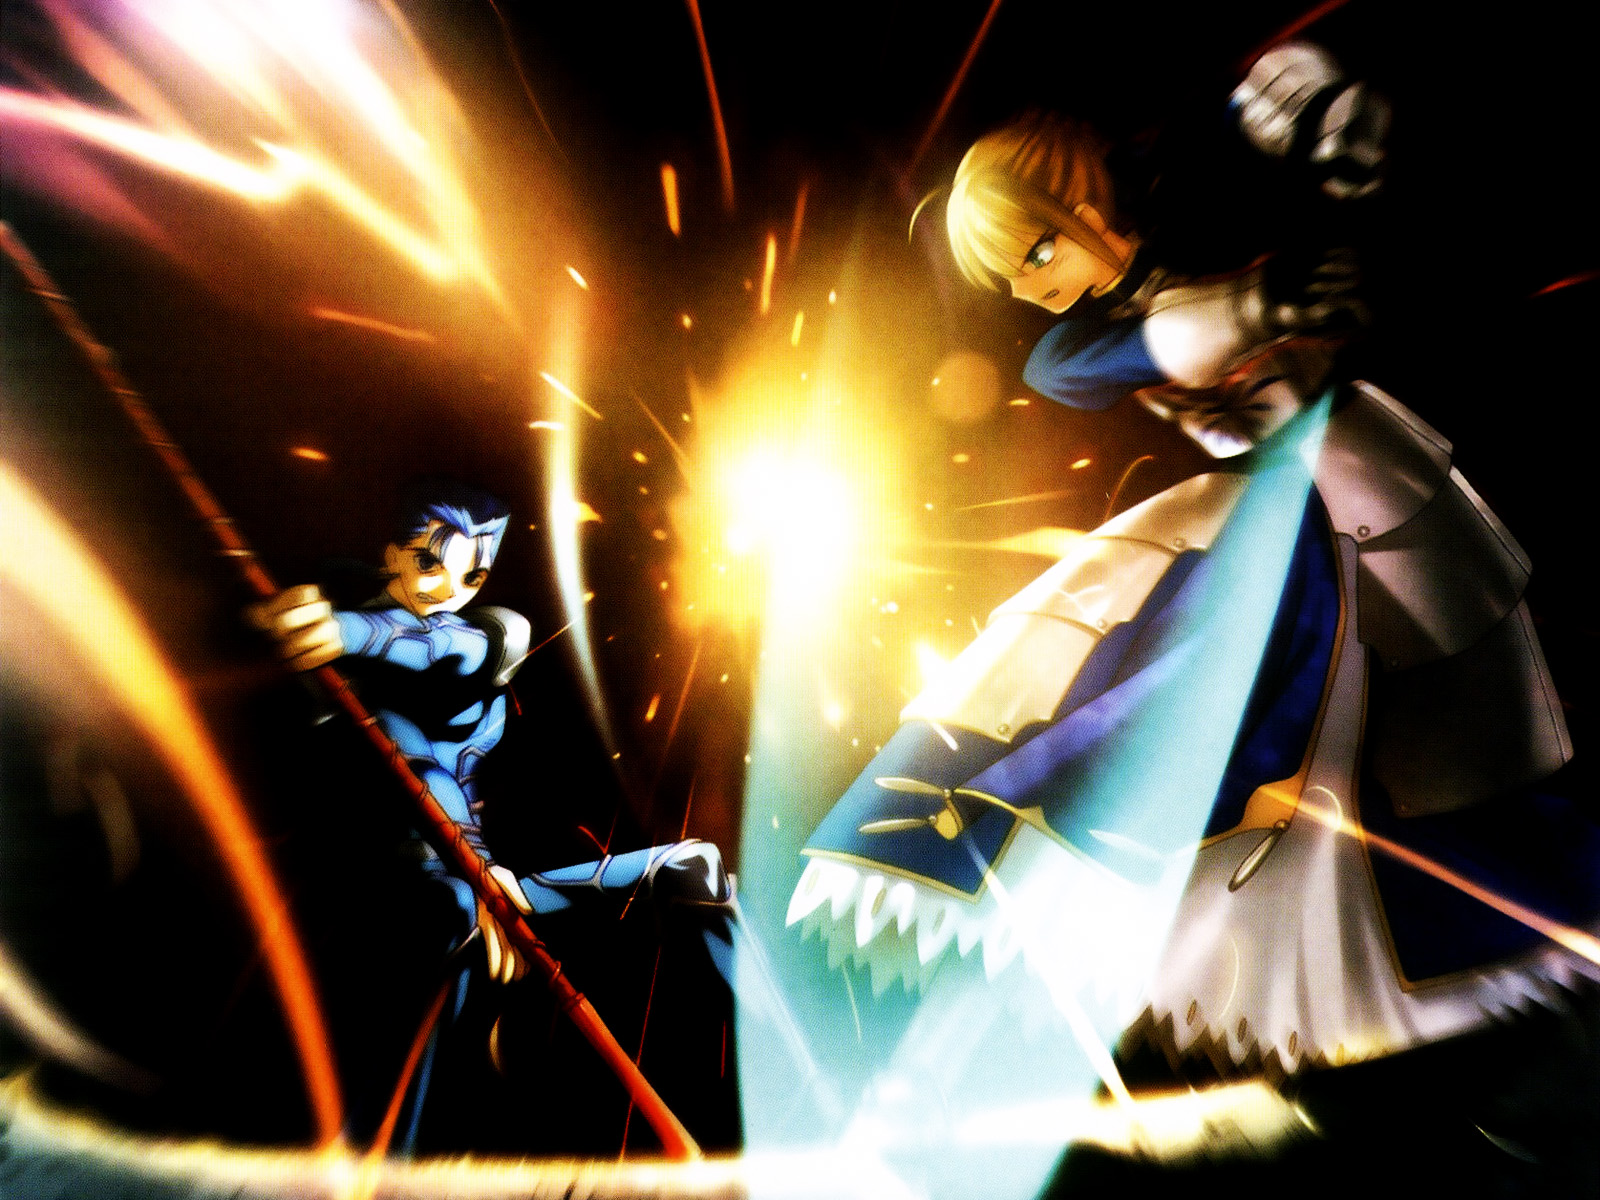 Fate/Zero characters Saber and Lancer in anime style desktop wallpaper.